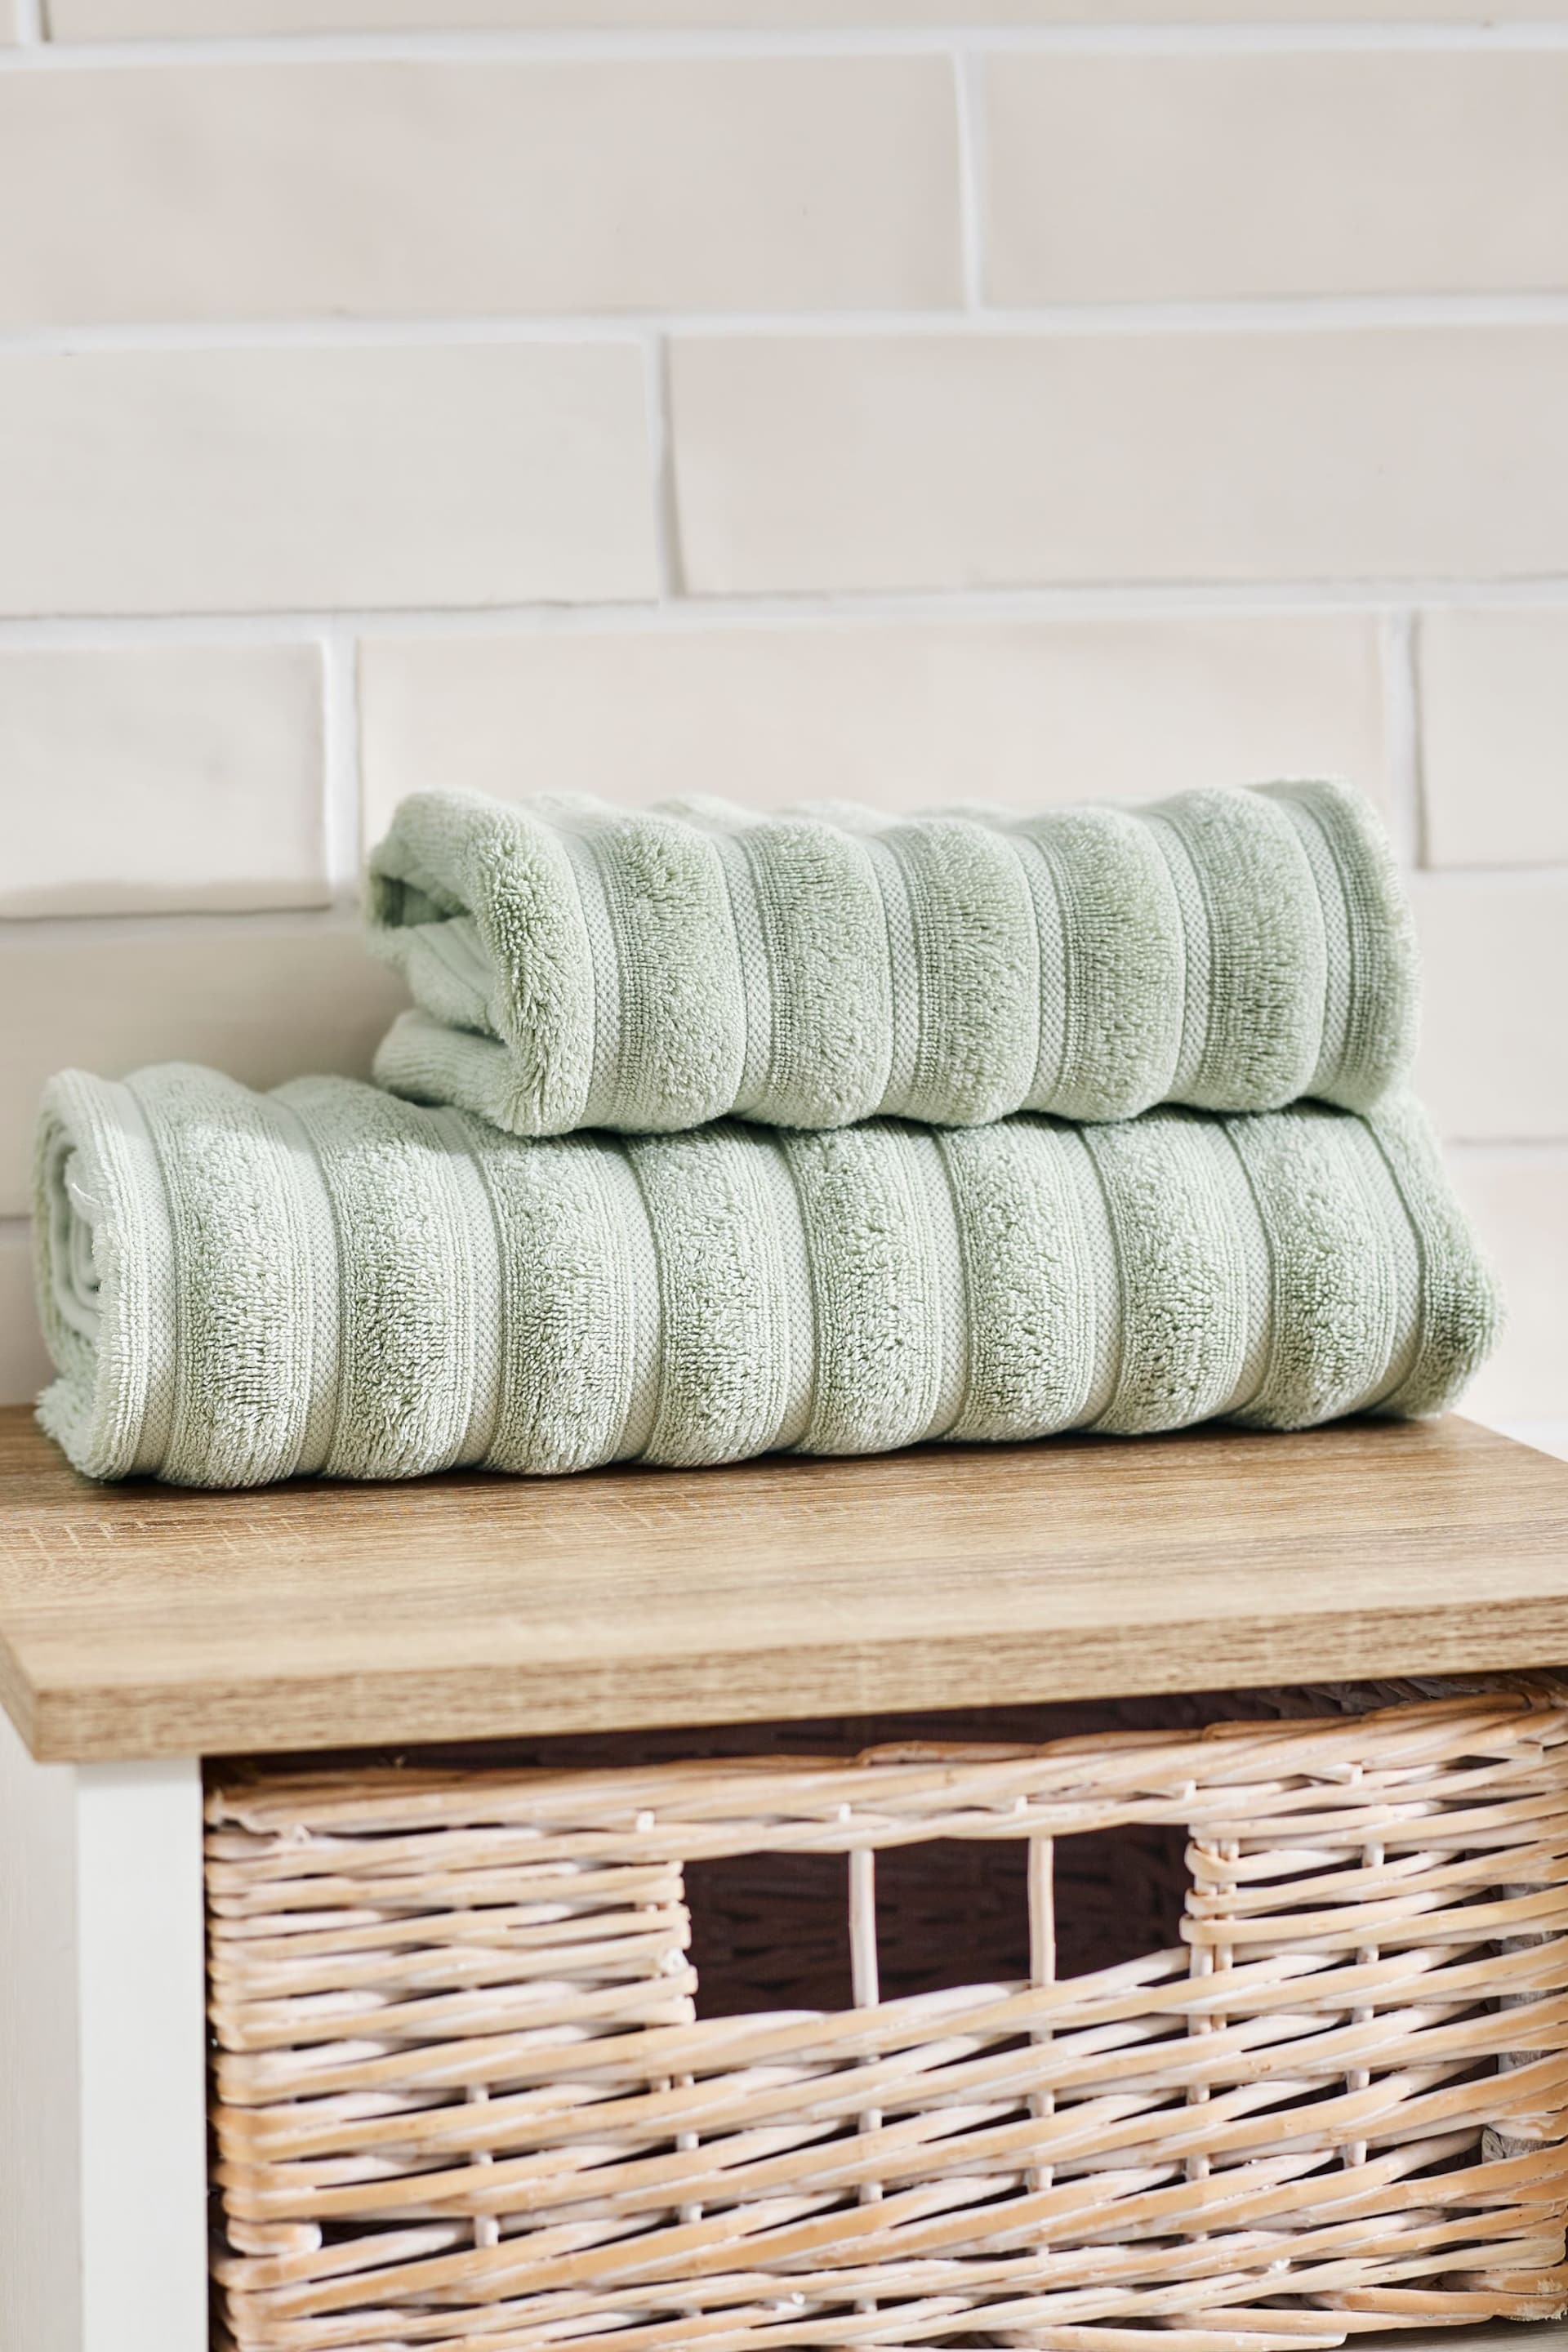 Sage Green Ribbed Towel 100% Cotton - Image 5 of 5